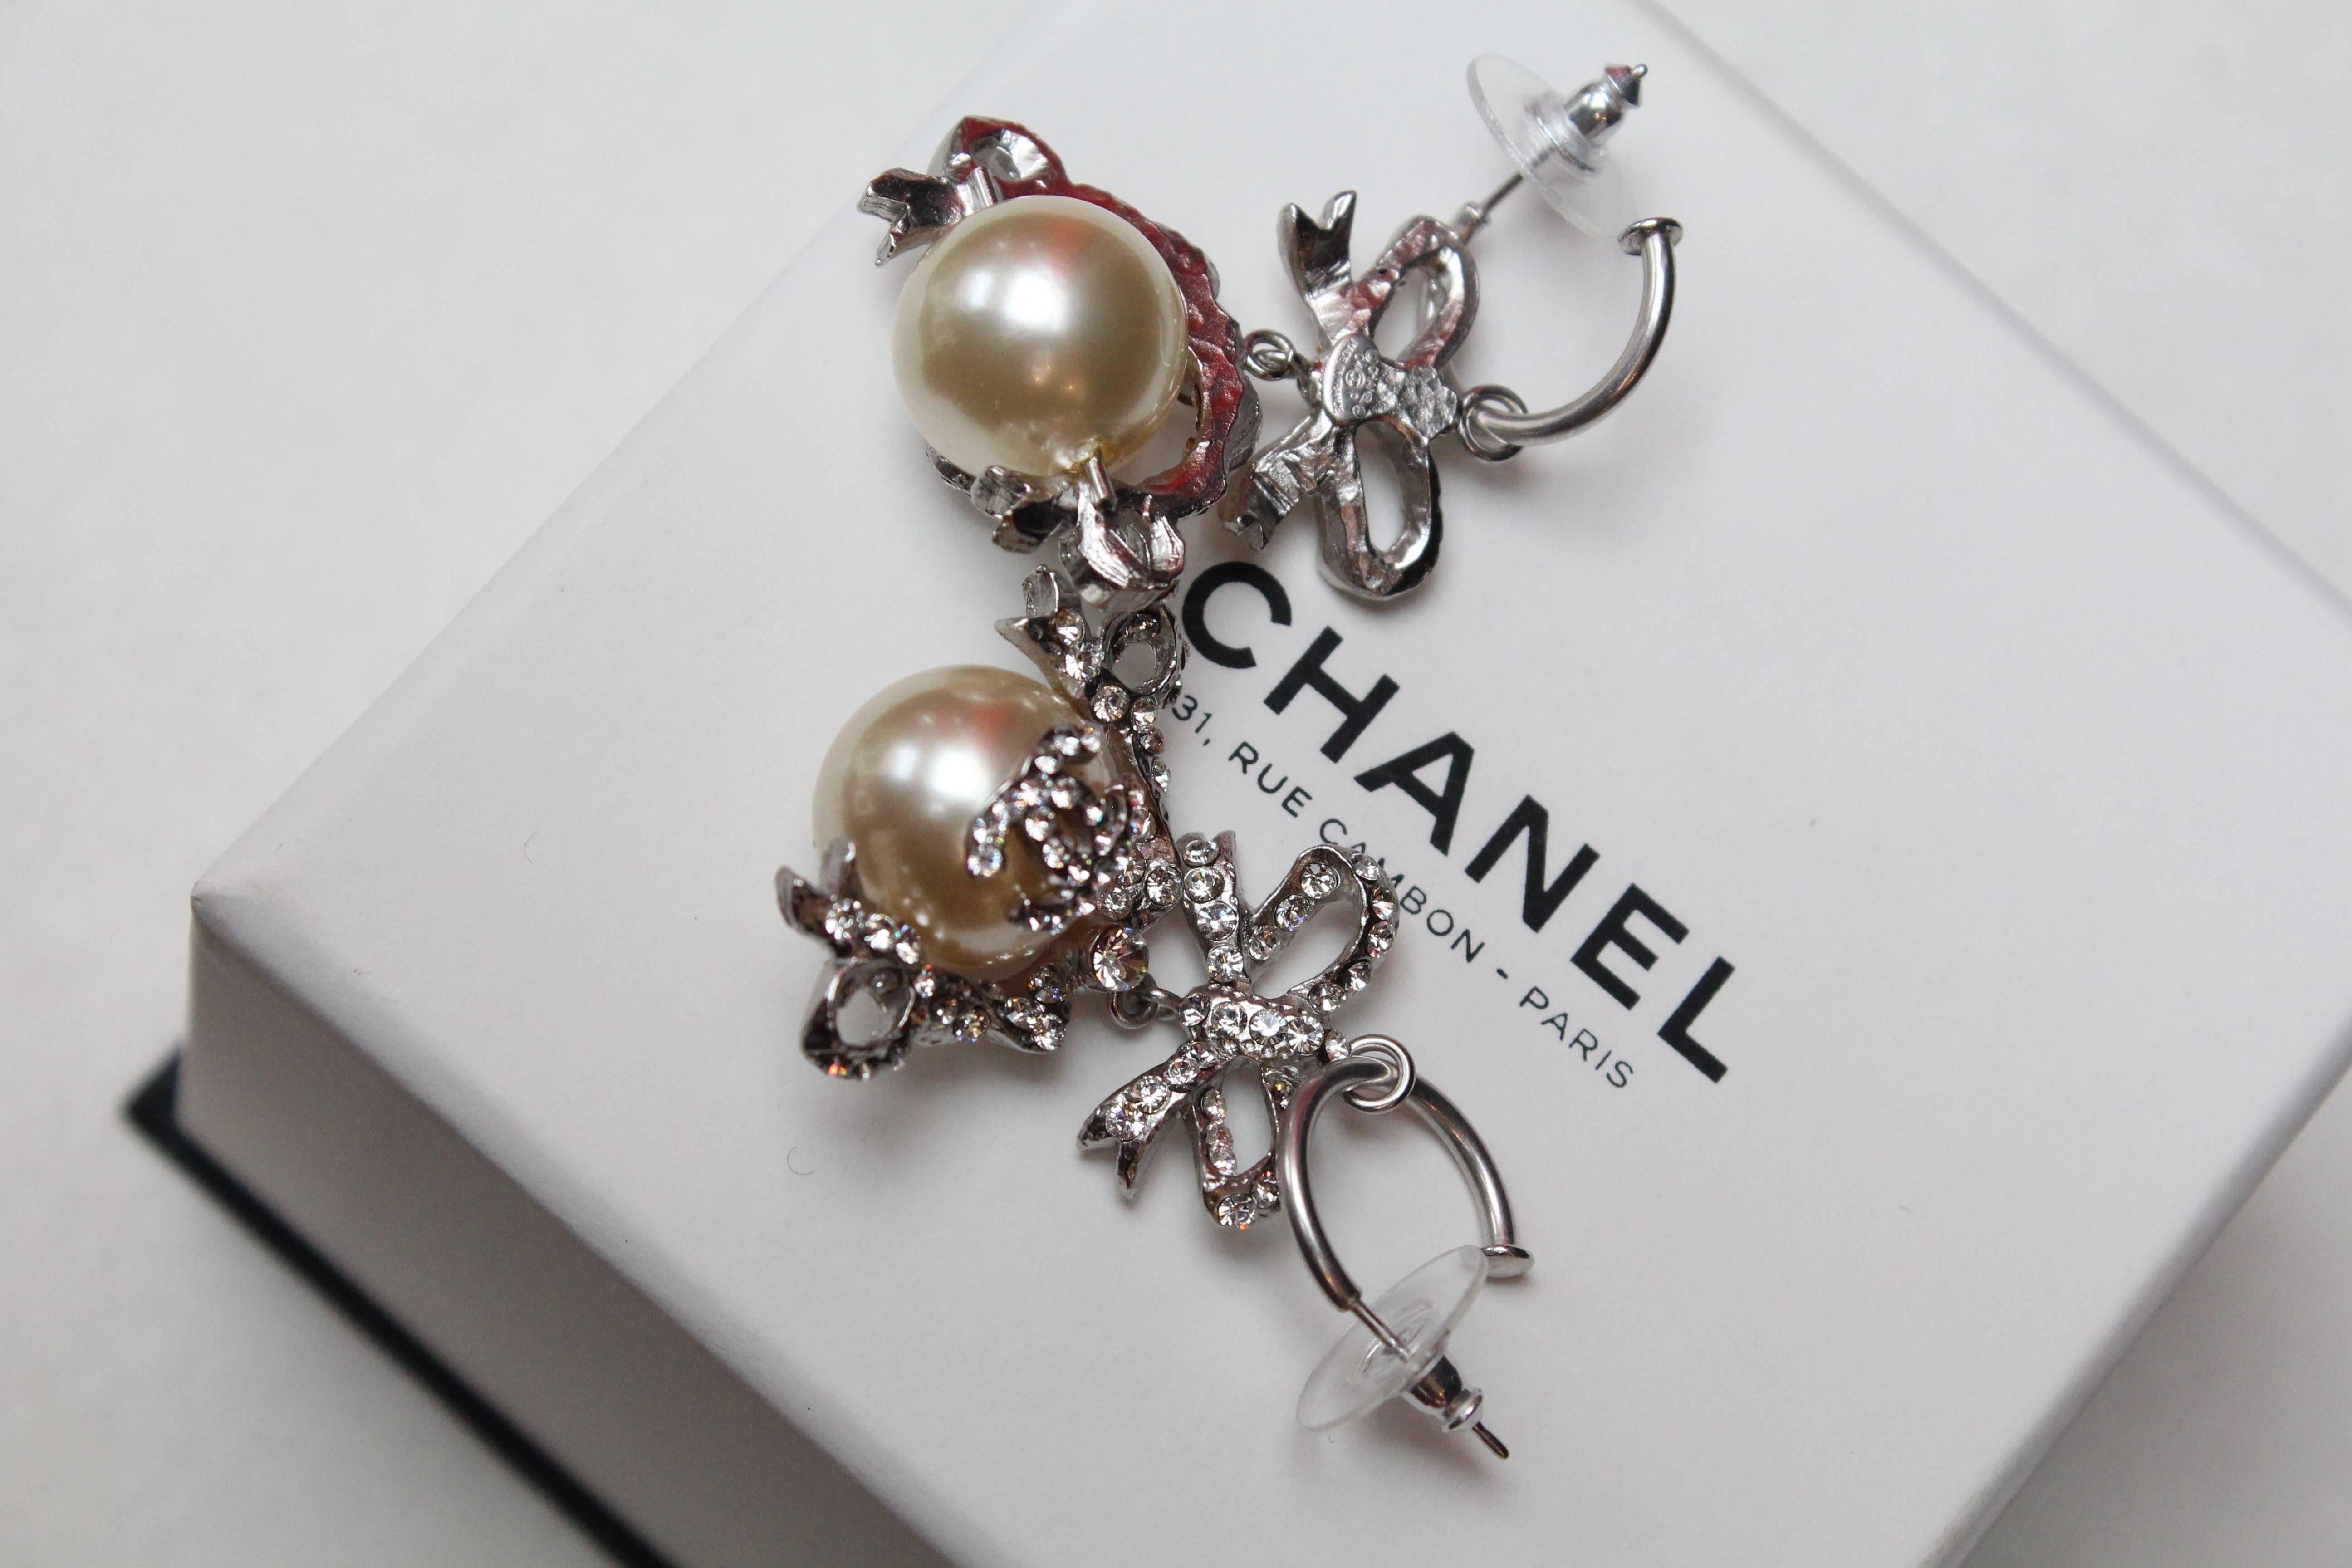 2004 Chanel gorgeous earrings representing a bow paved with rhinestones 2